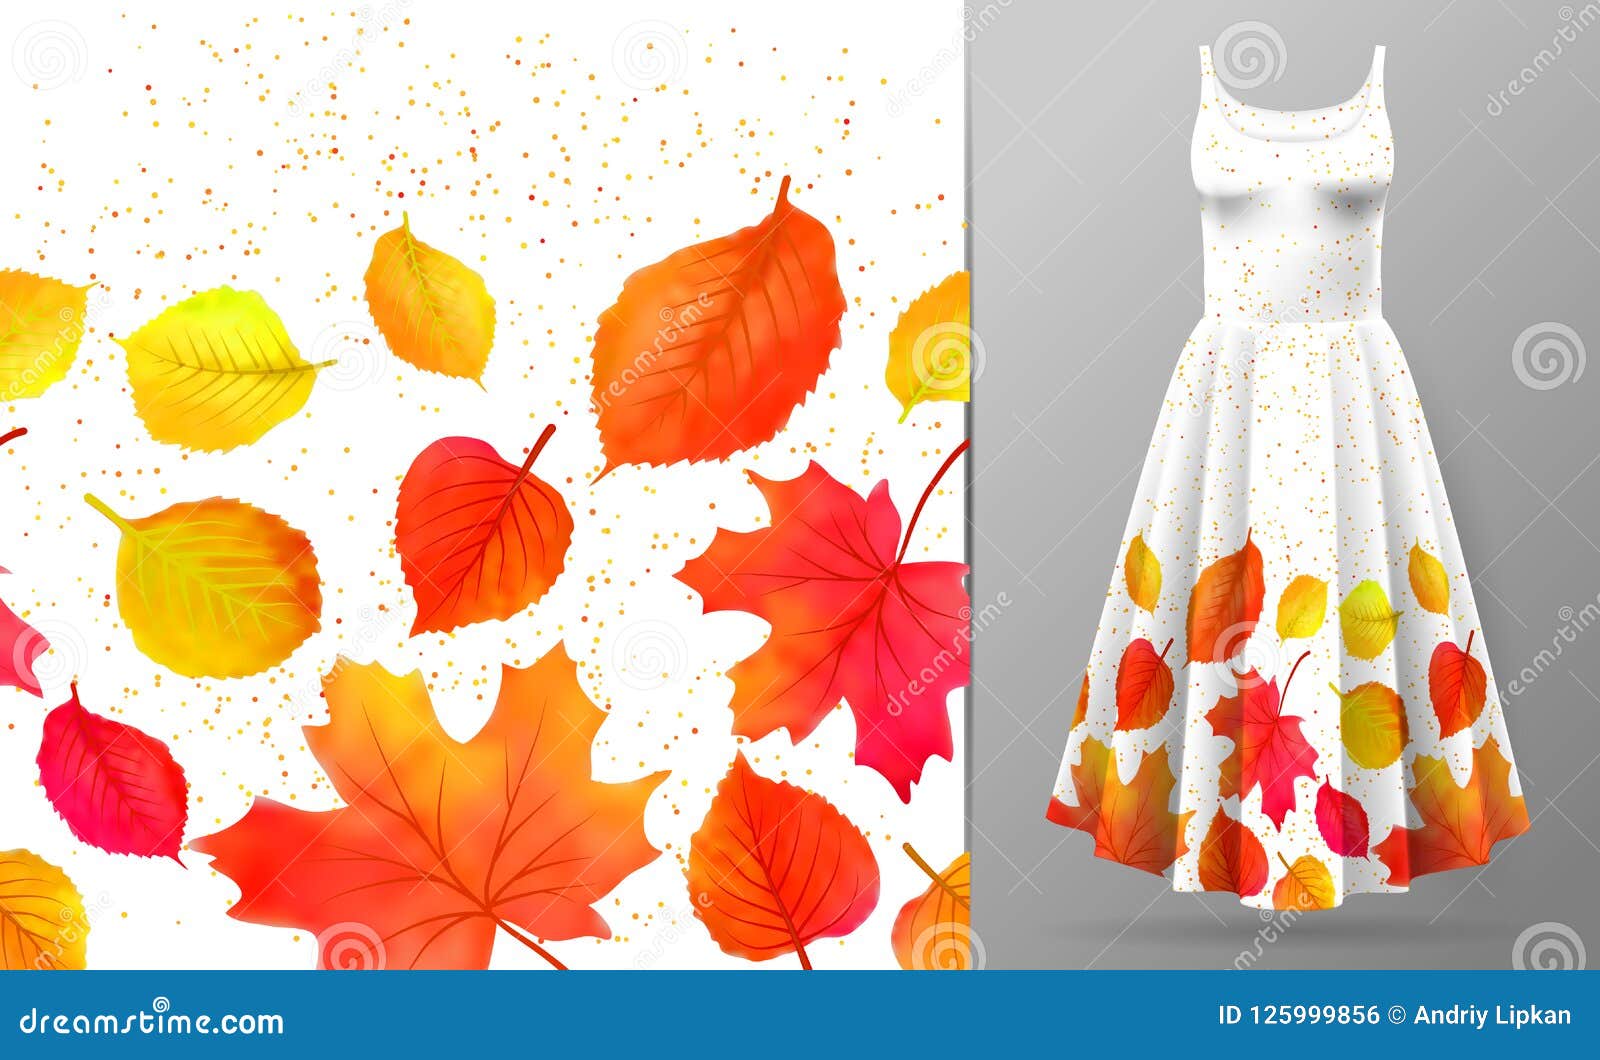 Download Seamless Border Of Colorful Autumn Leaves Isolated On ...